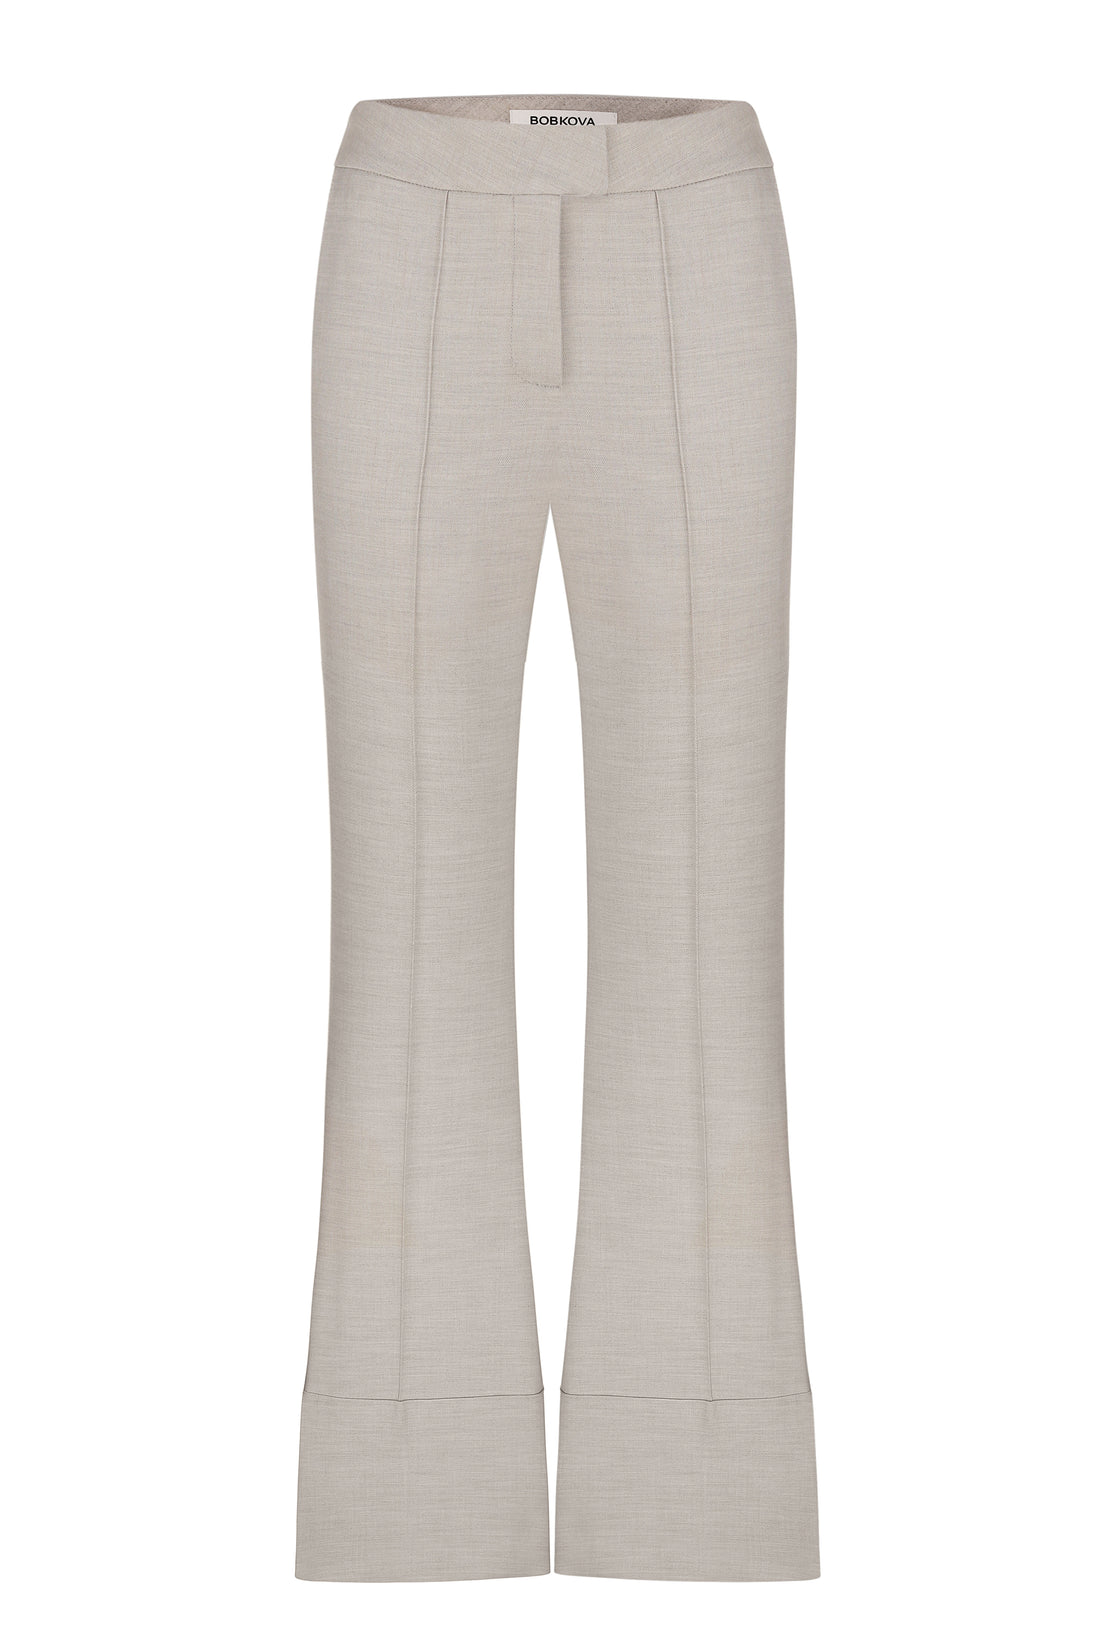 Tailored trouser with cuffs